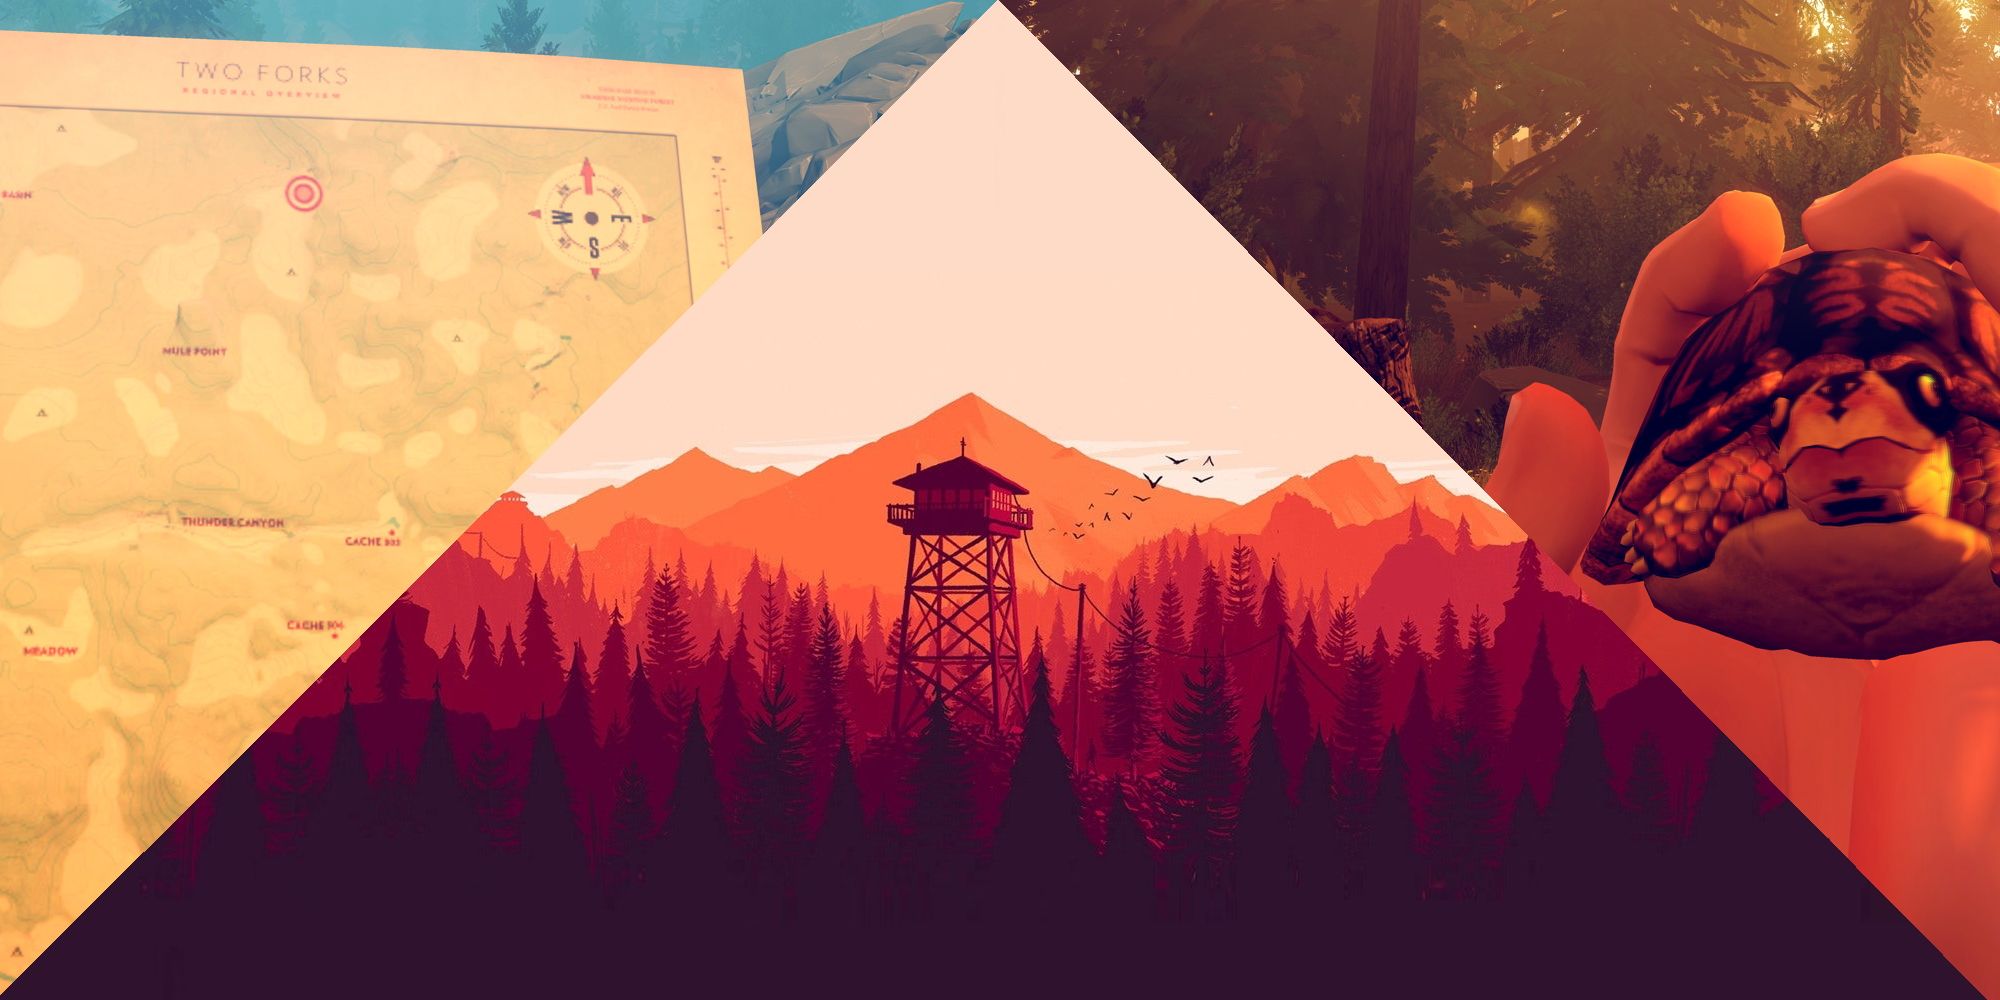 the firewatch game